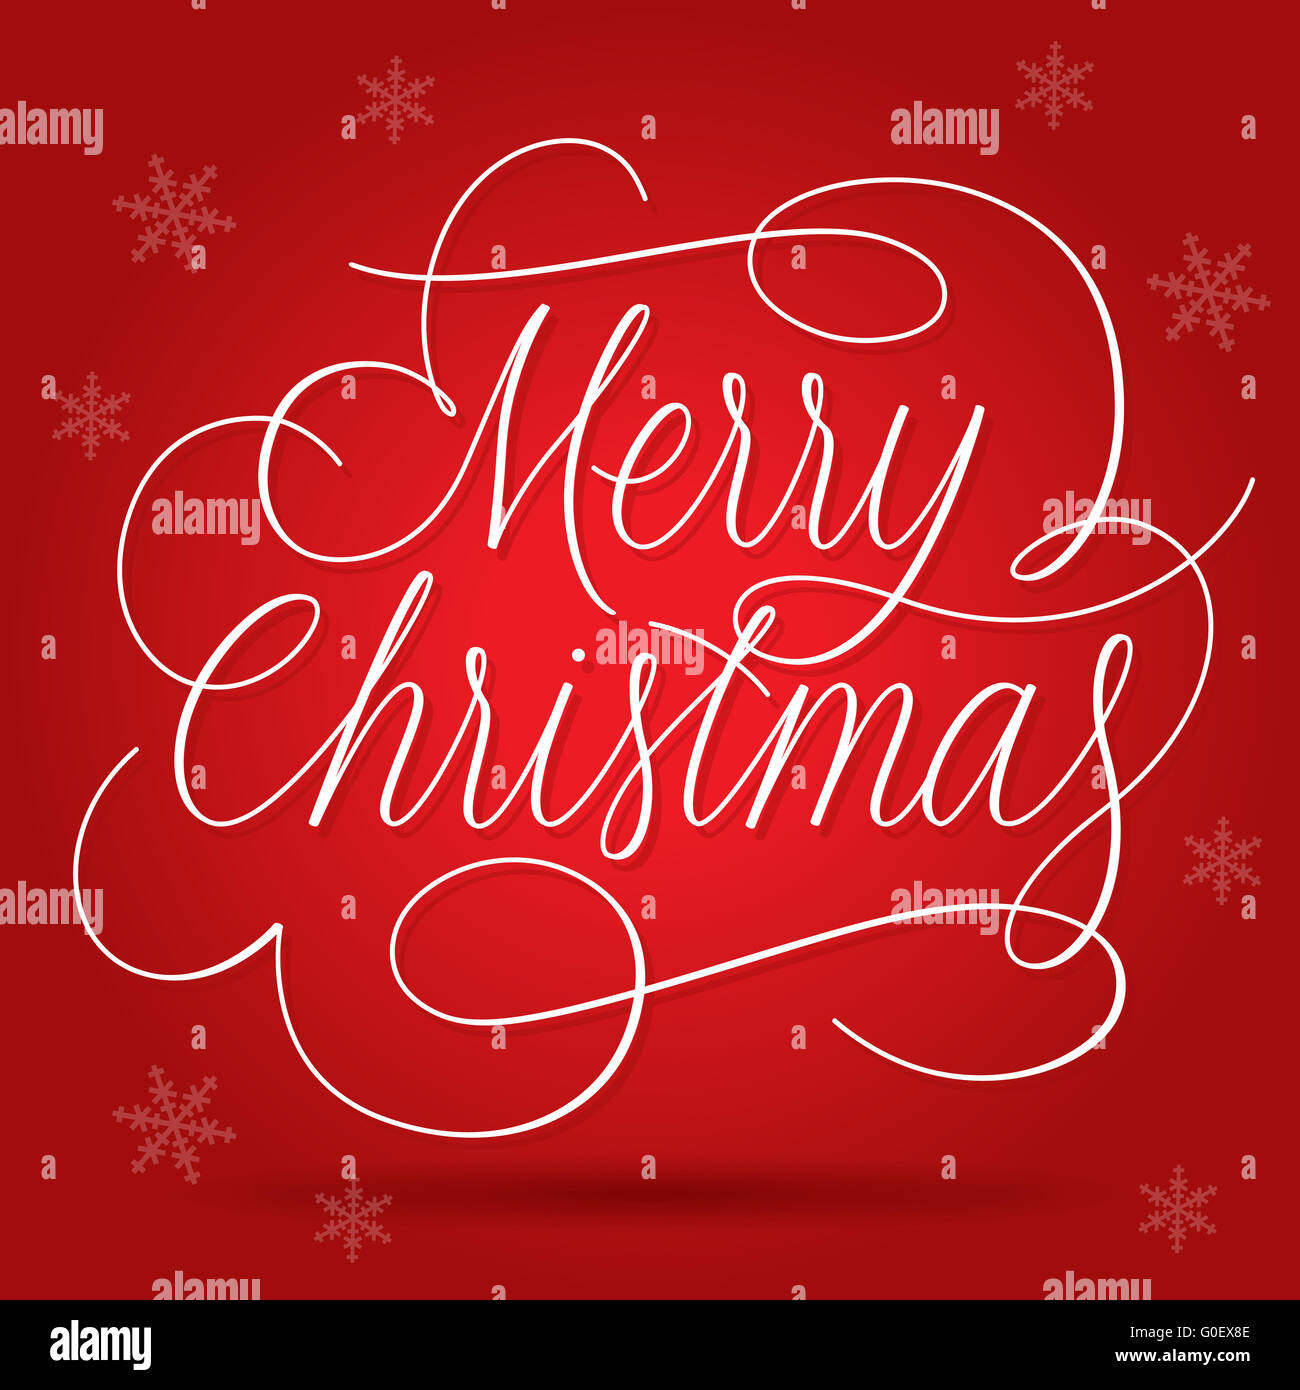 Merry Christmas Greetings Slogan on red background Stock Photo